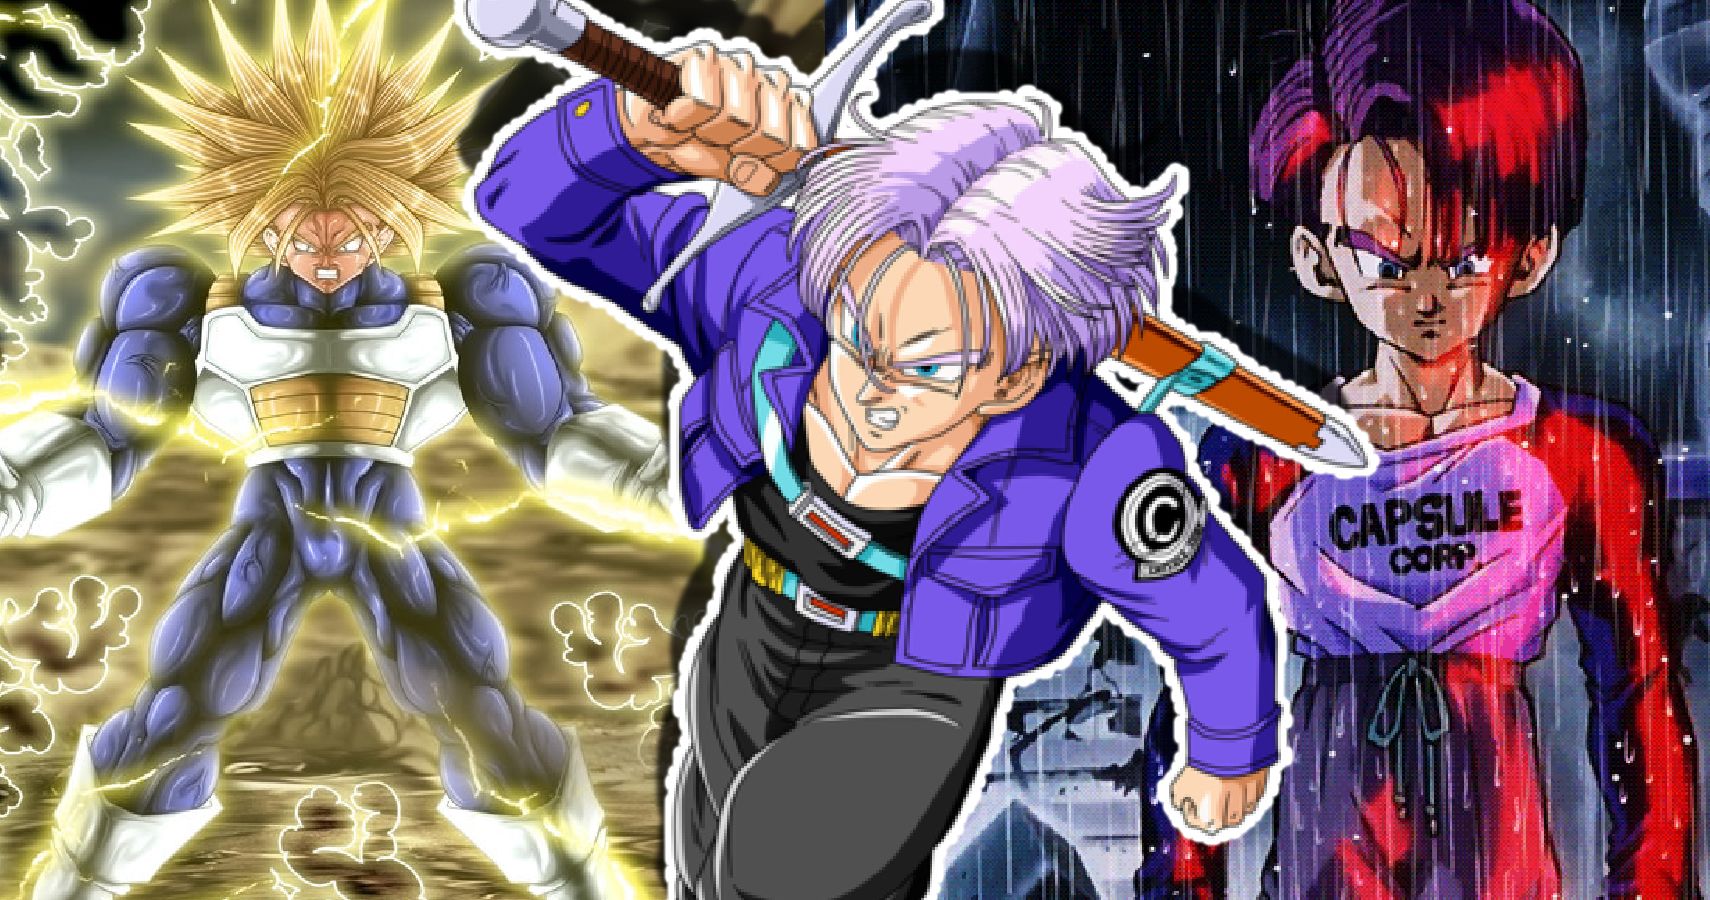 Capsule Corp: Things You Didn't Know About Trunks